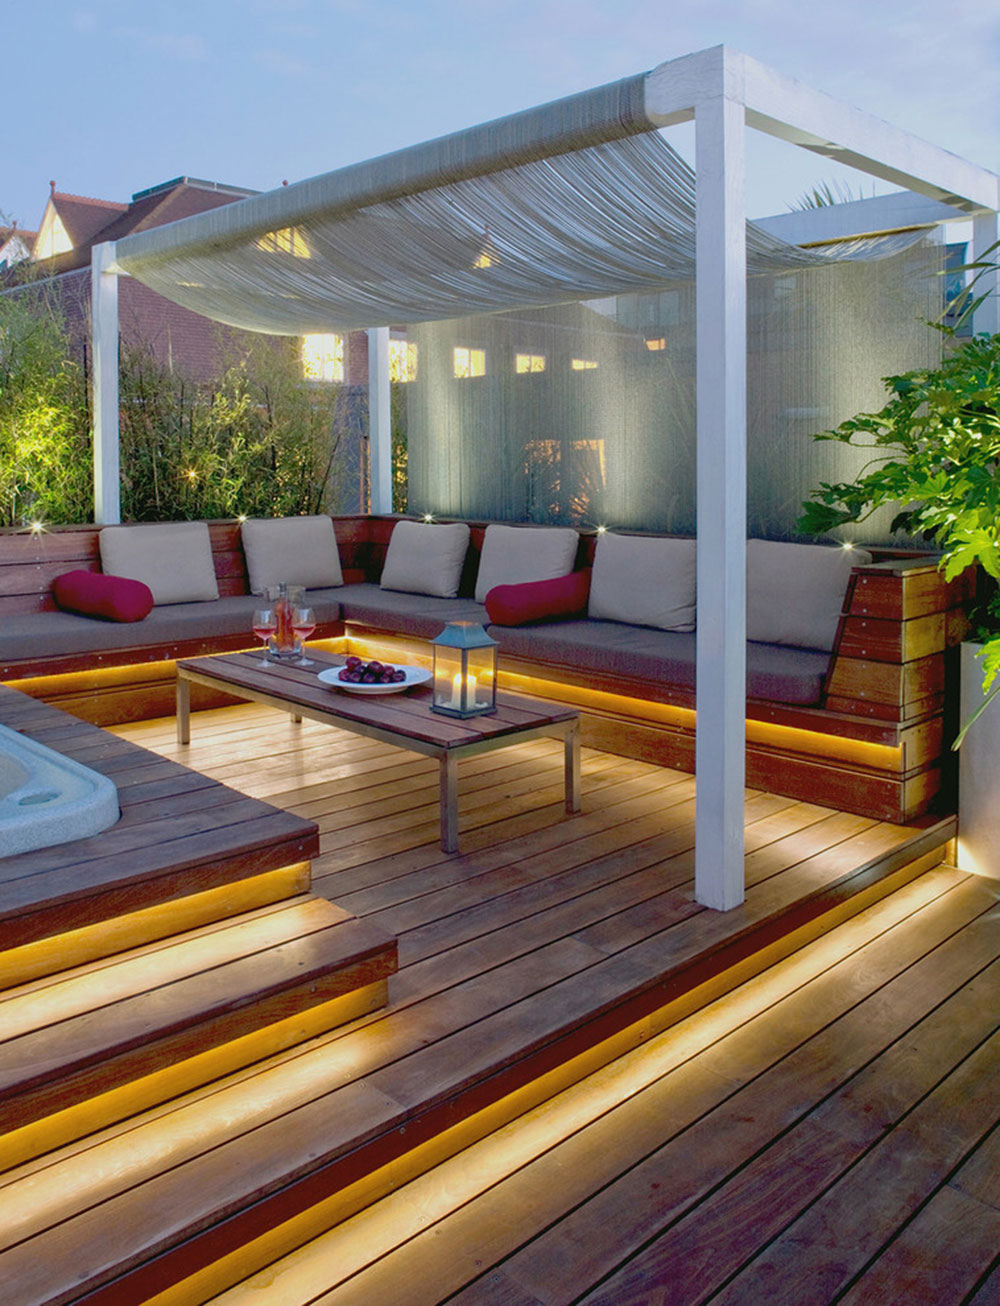 16 ideas for creating an outdoor living space